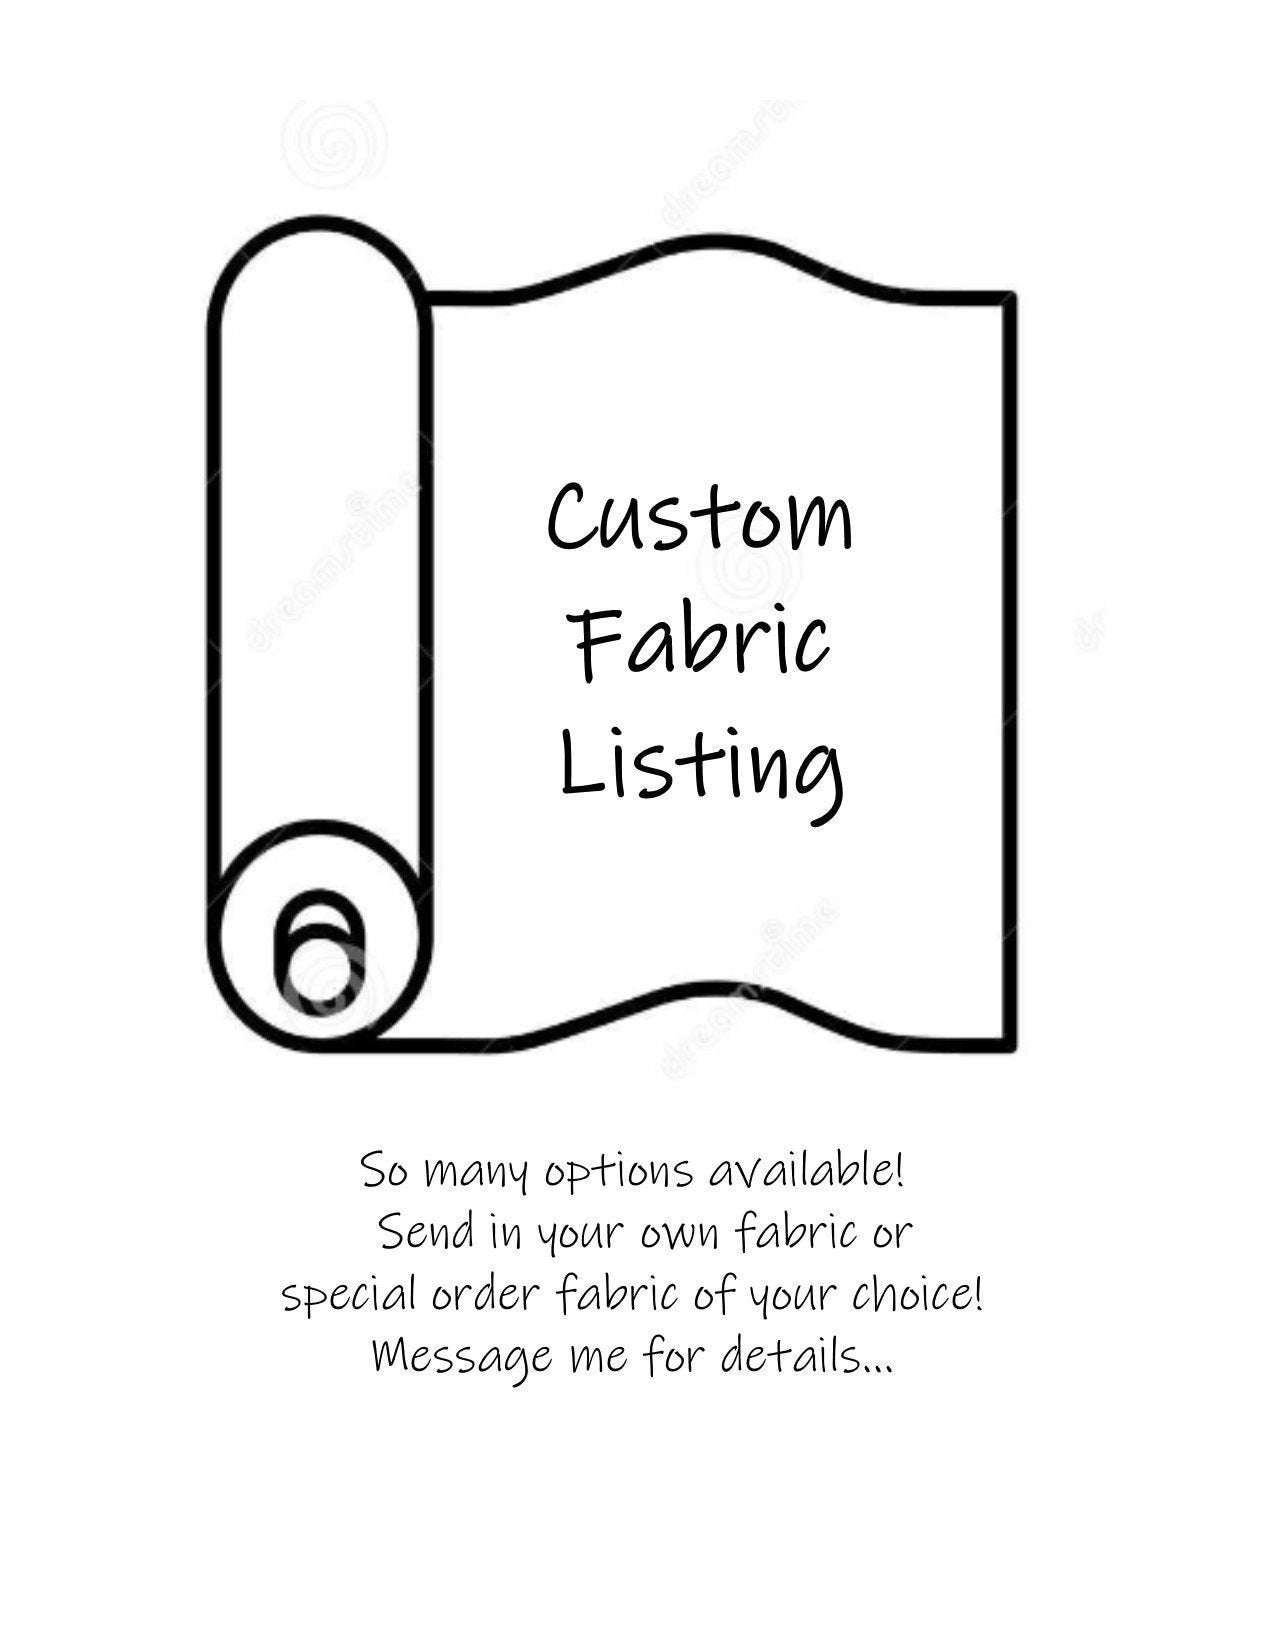 Custom Made Faux Roman Shades and Valances in Your Fabric, Fully Lined, Custom Sizes, Modern Window Treatments in Custom Fabric